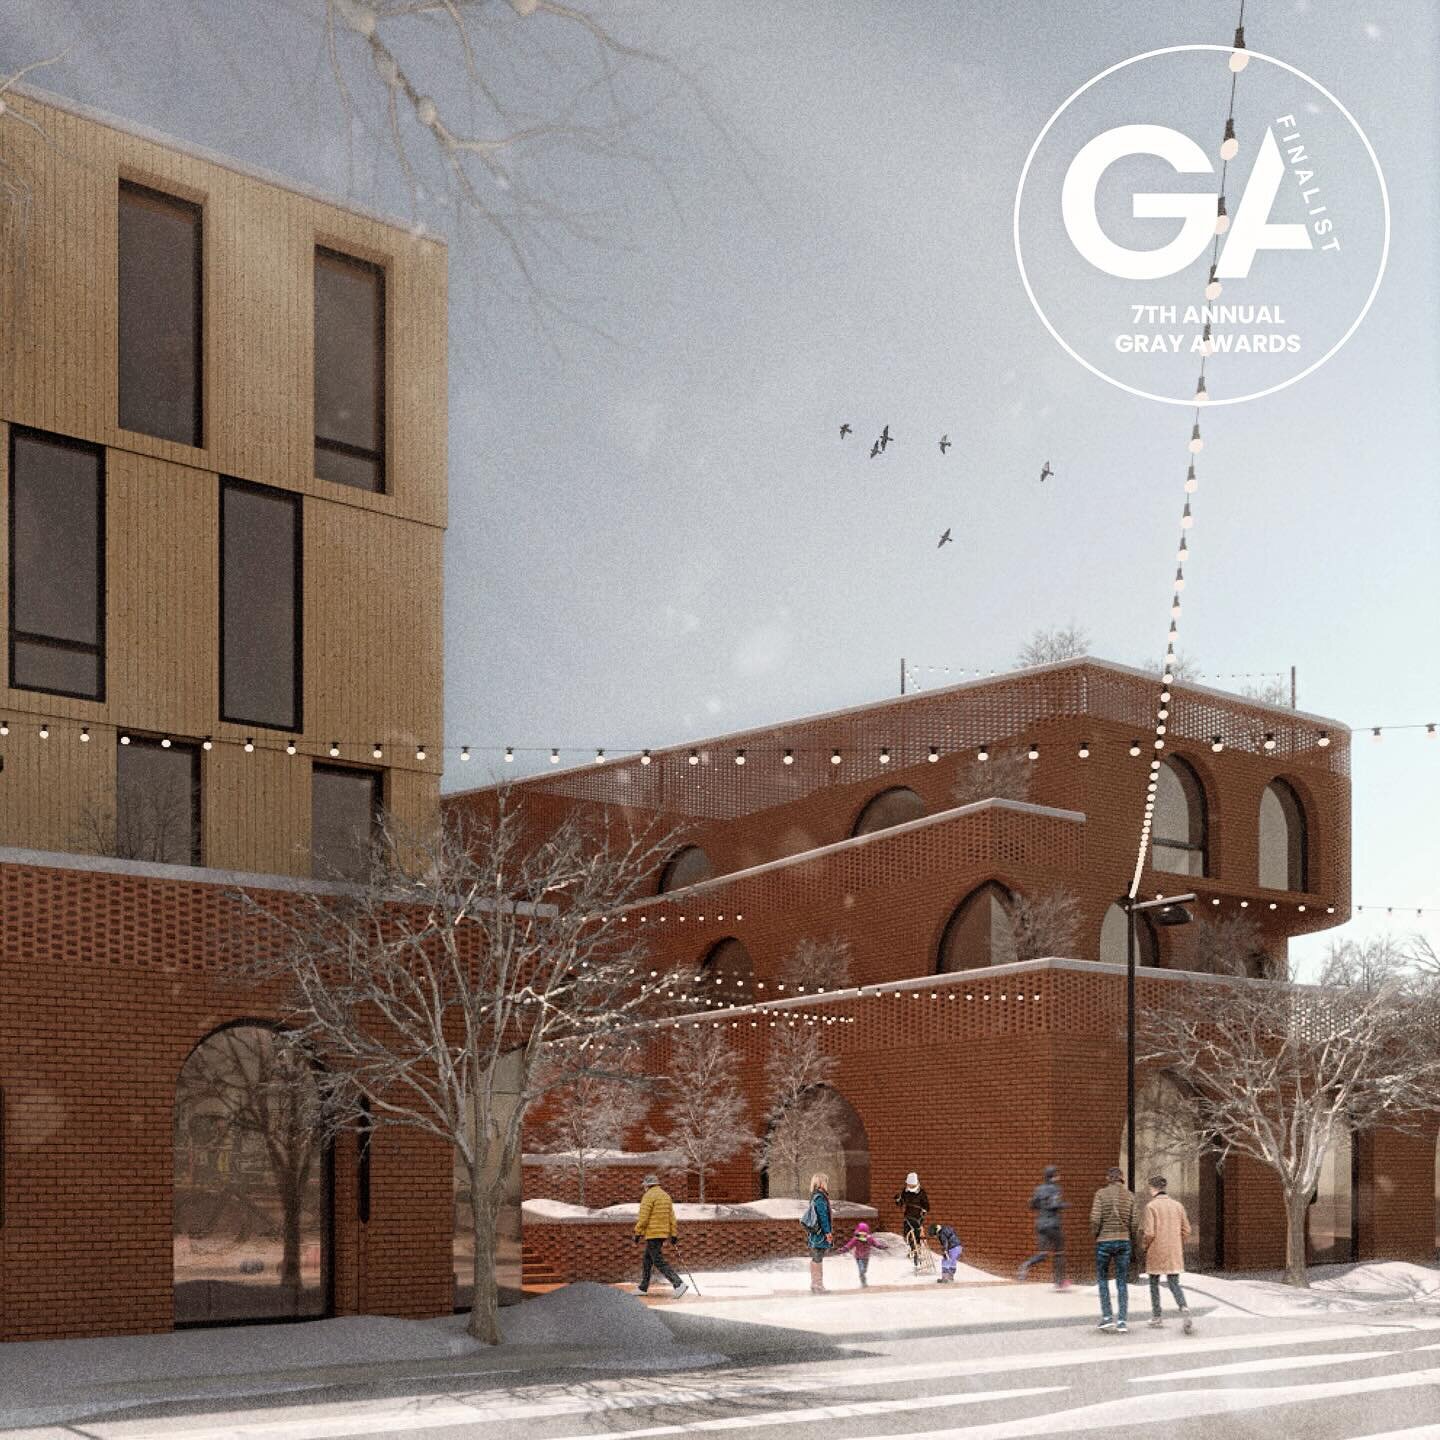 We are so honored to be a 7th Annual Gray Awards Finalist for Project Best, under the Breakout Category, Visionary: 
Project Best is a mixed-use building that integrates seamlessly into the urban fabric, yet also brings contemporary energy to Bozeman